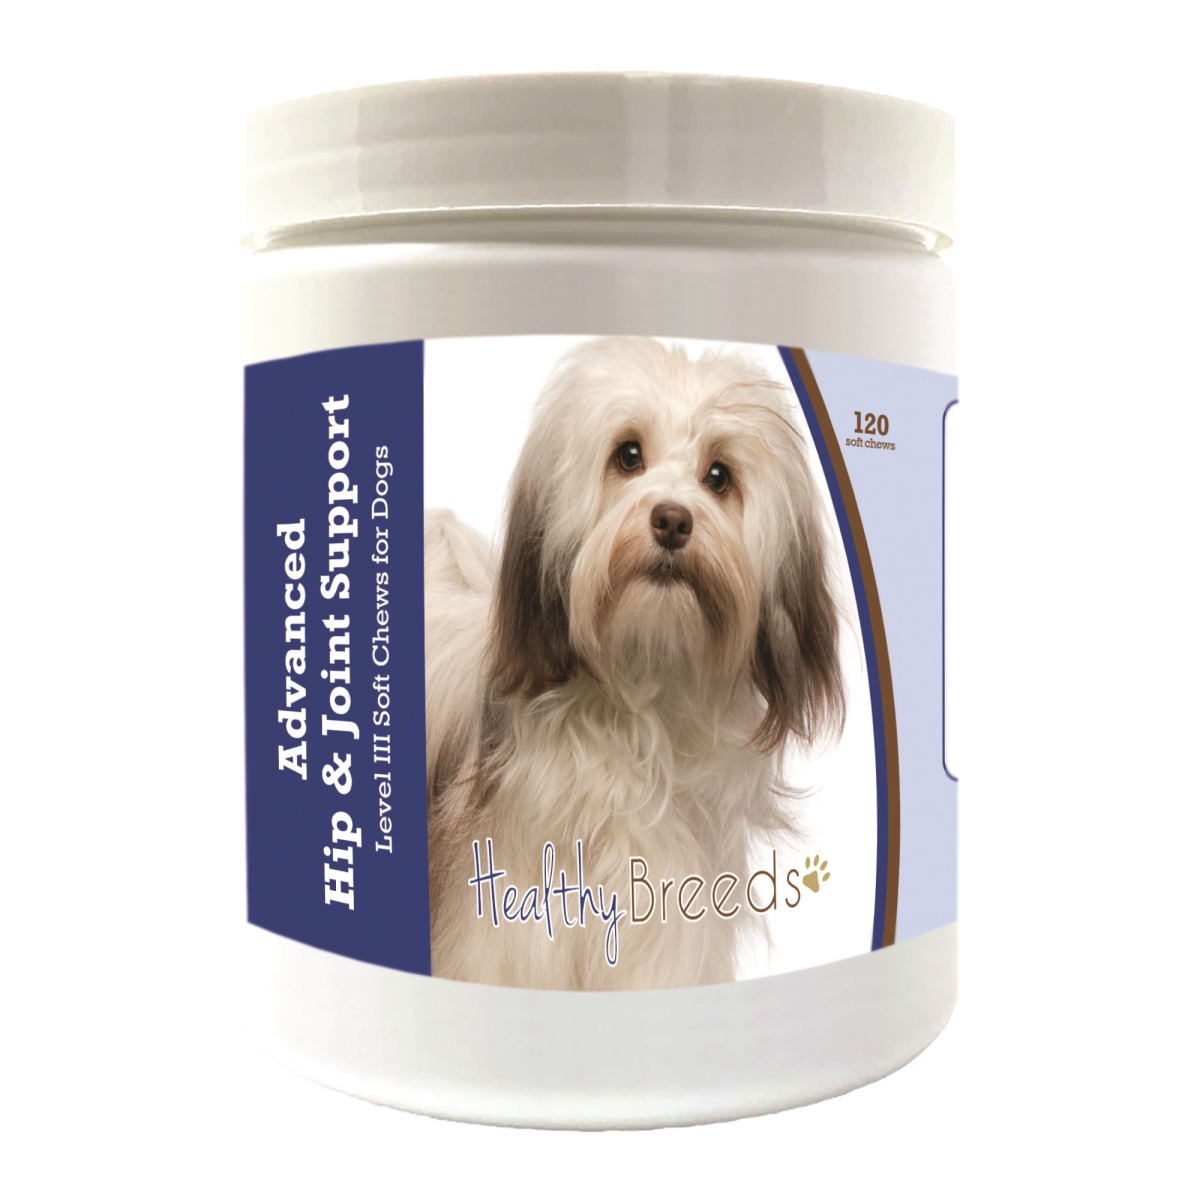 Picture of Healthy Breeds 192959898408 Havanese Advanced Hip & Joint Support Level III Soft Chews for Dogs